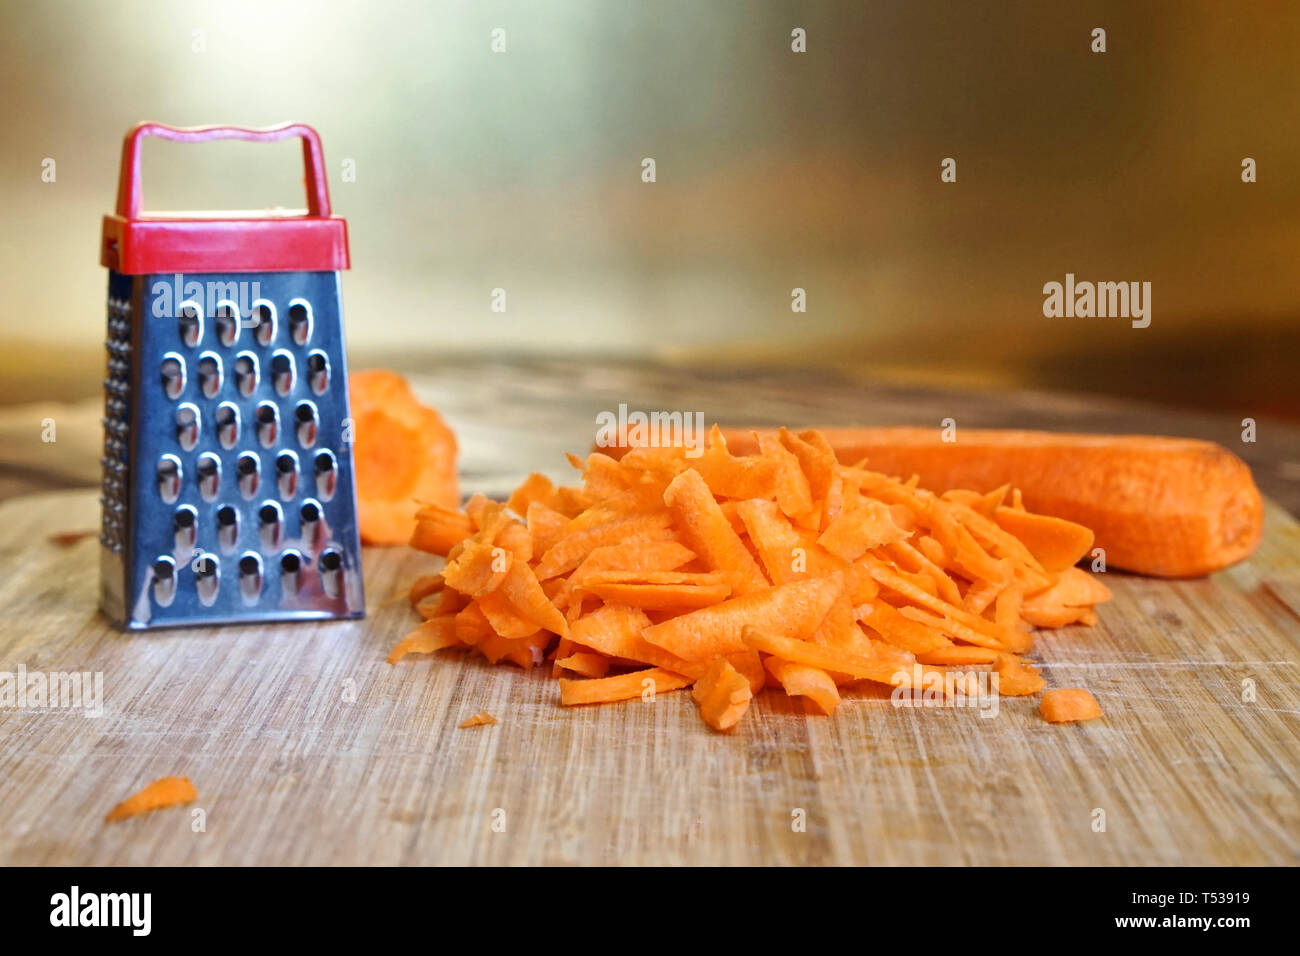 https://c8.alamy.com/comp/T53919/a-small-grater-and-a-large-carrot-are-on-the-cutting-board-unusual-mystery-and-optical-illusion-mismatch-T53919.jpg